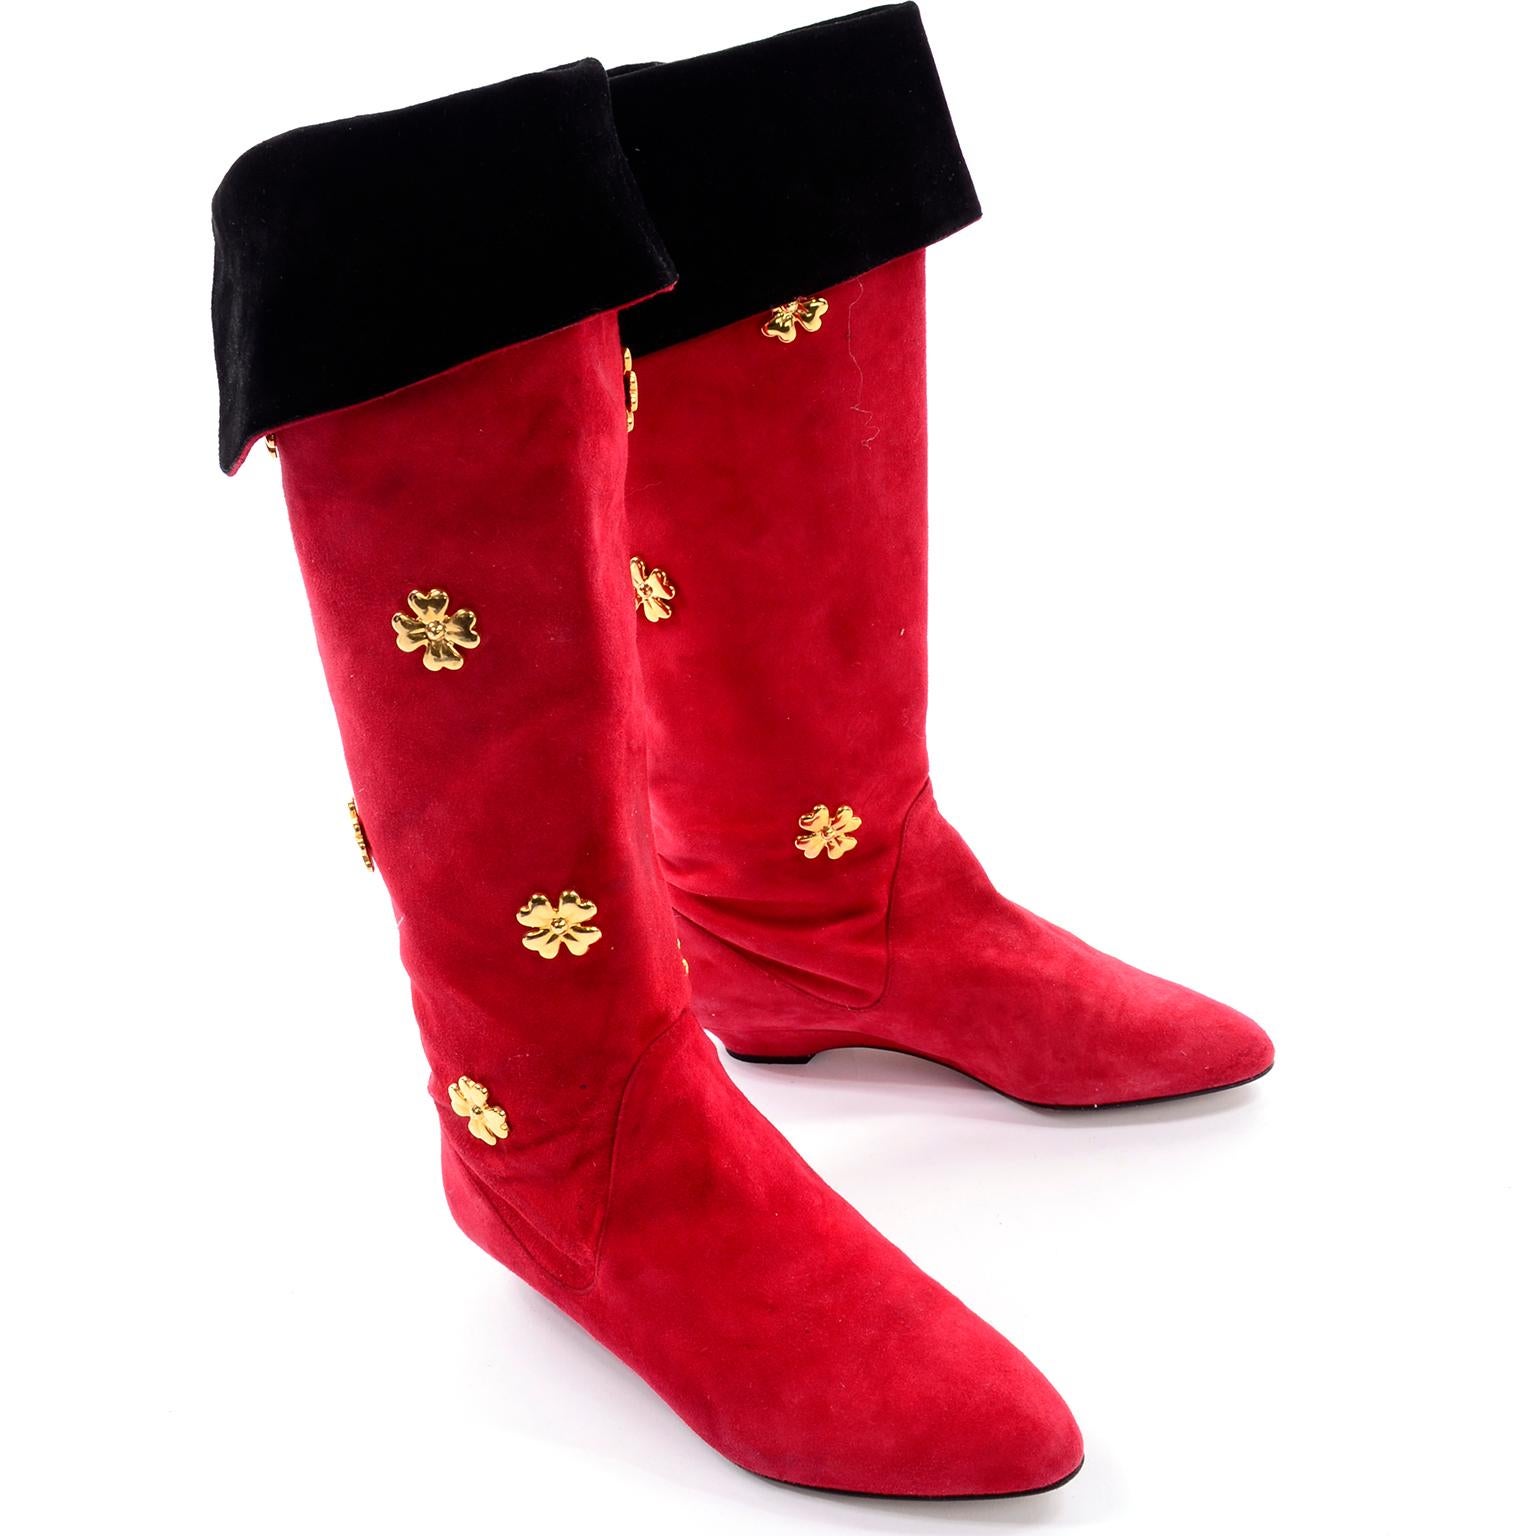 Vintage 1980s Escada Red Suede Boots With Gold Metal Clovers Size 37 1